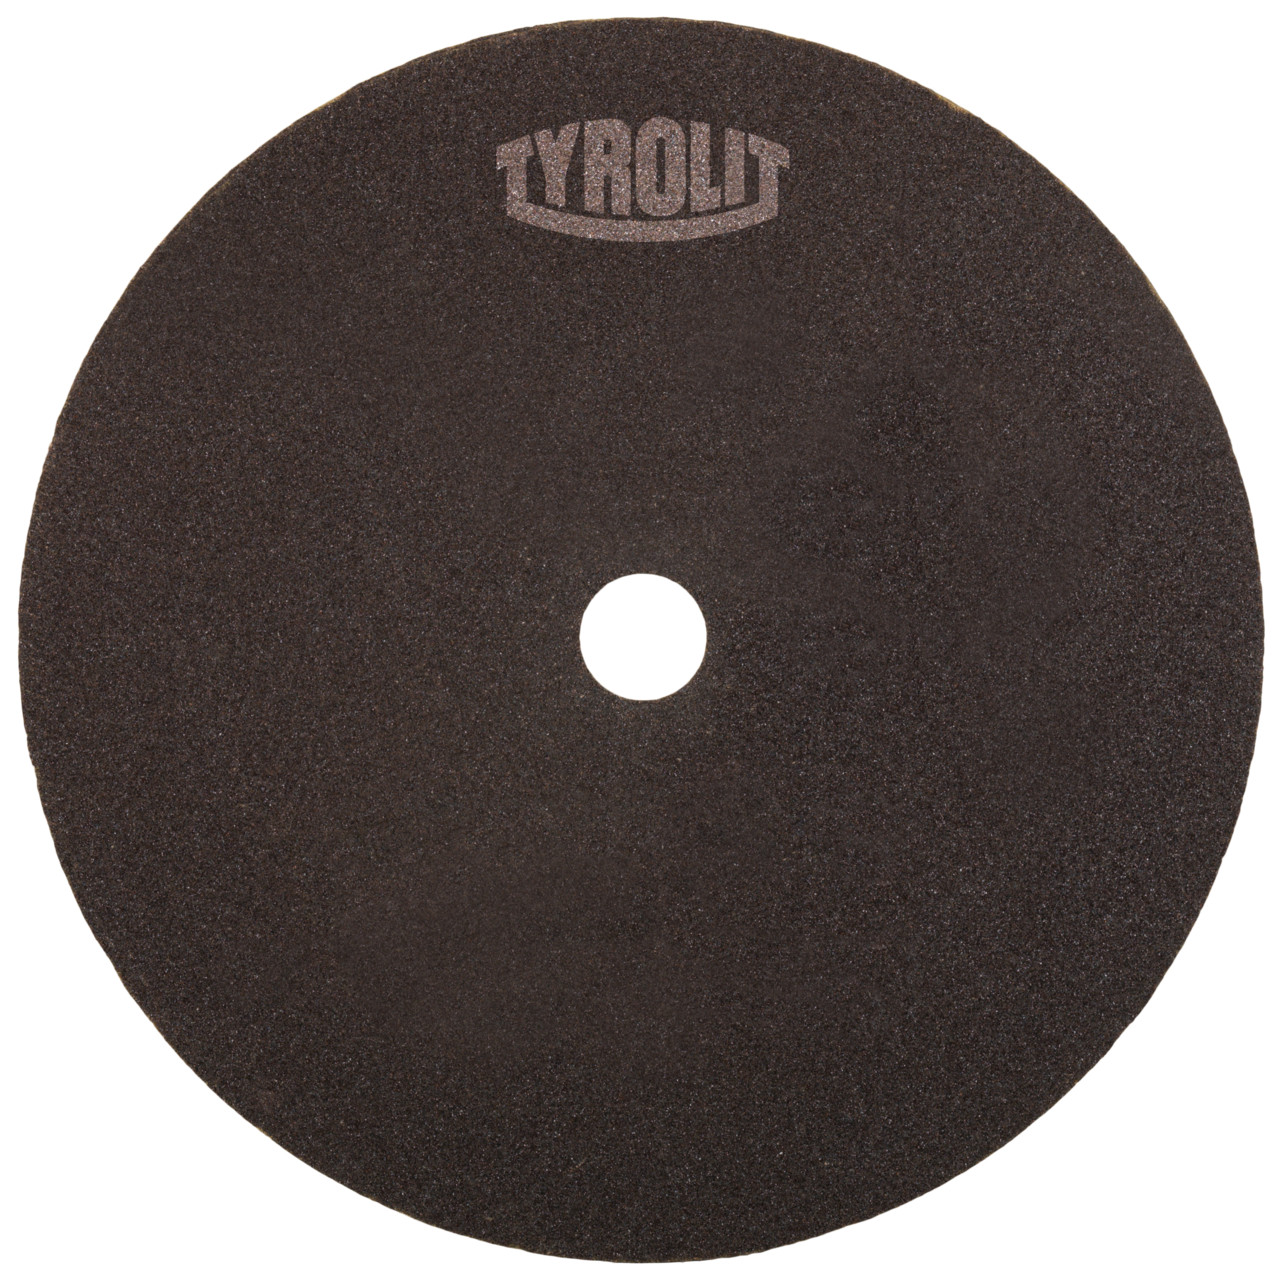 TYROLIT cut-off wheel for cutting and saw sharpening DxDxH 150x1.5x20 For steel and HSS, shape: 41N - straight version (non-woven cut-off wheel), Art. 8833